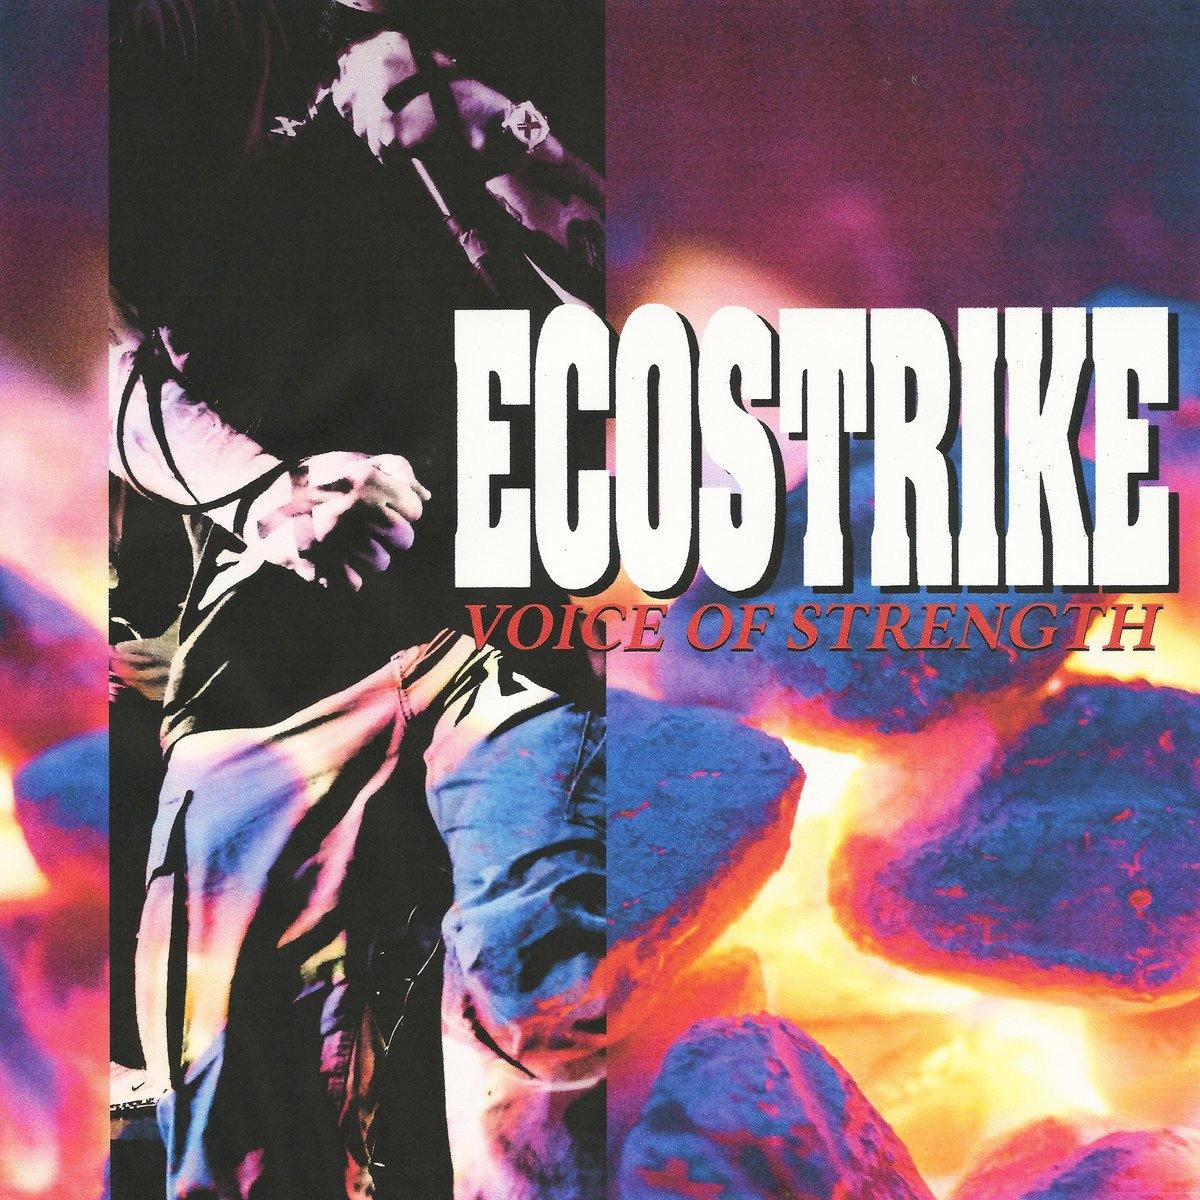 Buy – Ecostrike "Voice of Strength" 12" – Band & Music Merch – Cold Cuts Merch